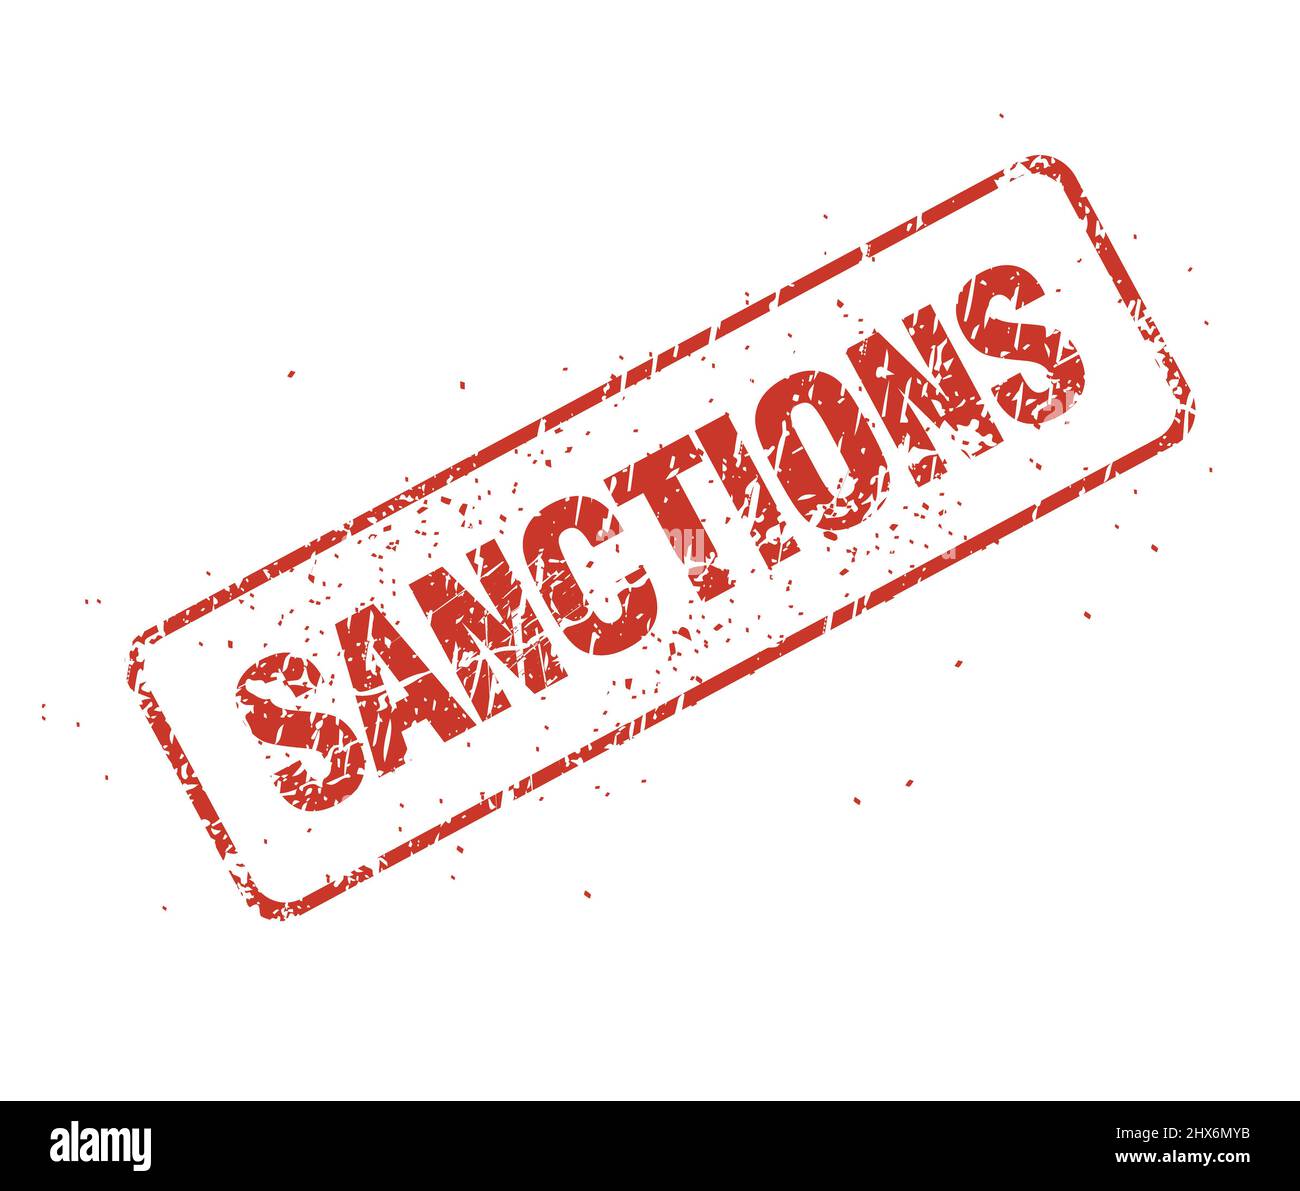 Sanctions inscription in the form of a grunge shabby seal impression Isolated on white background. Illustration. Stock Photo